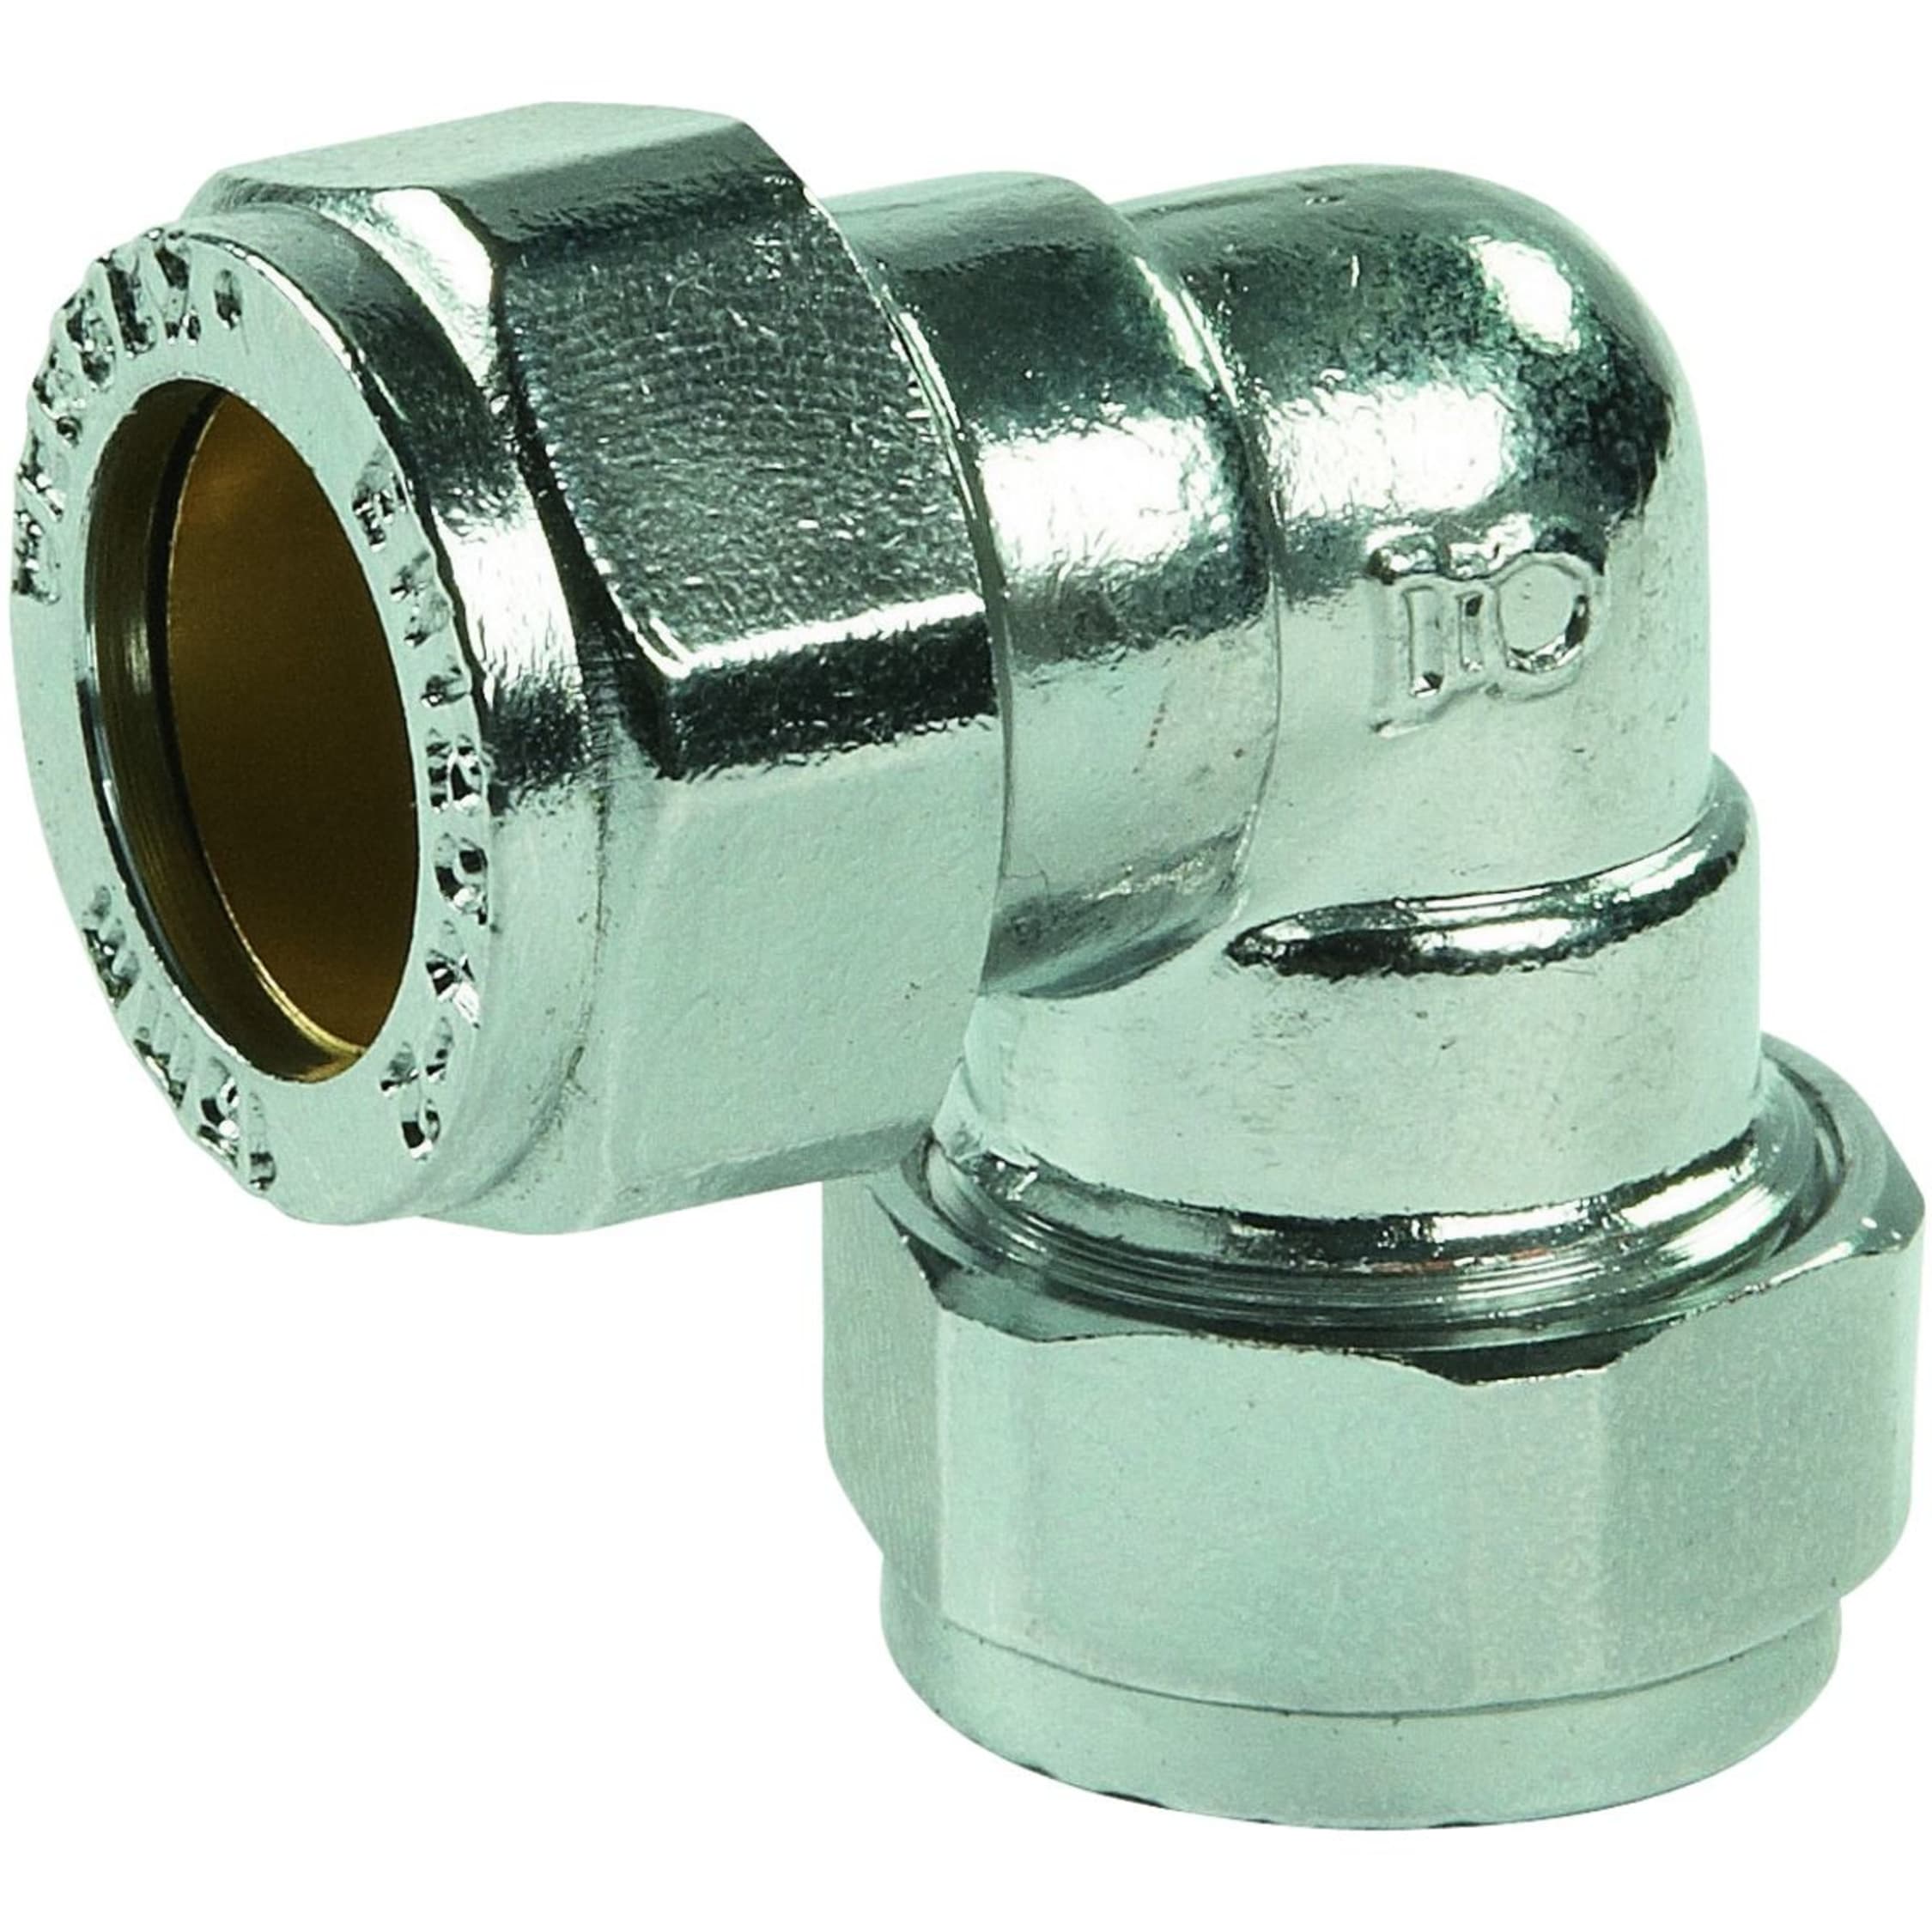 Details about   2x Kinetic ELBOW 15mm Chrome Plated Brass Male-Female Or Female-Female 